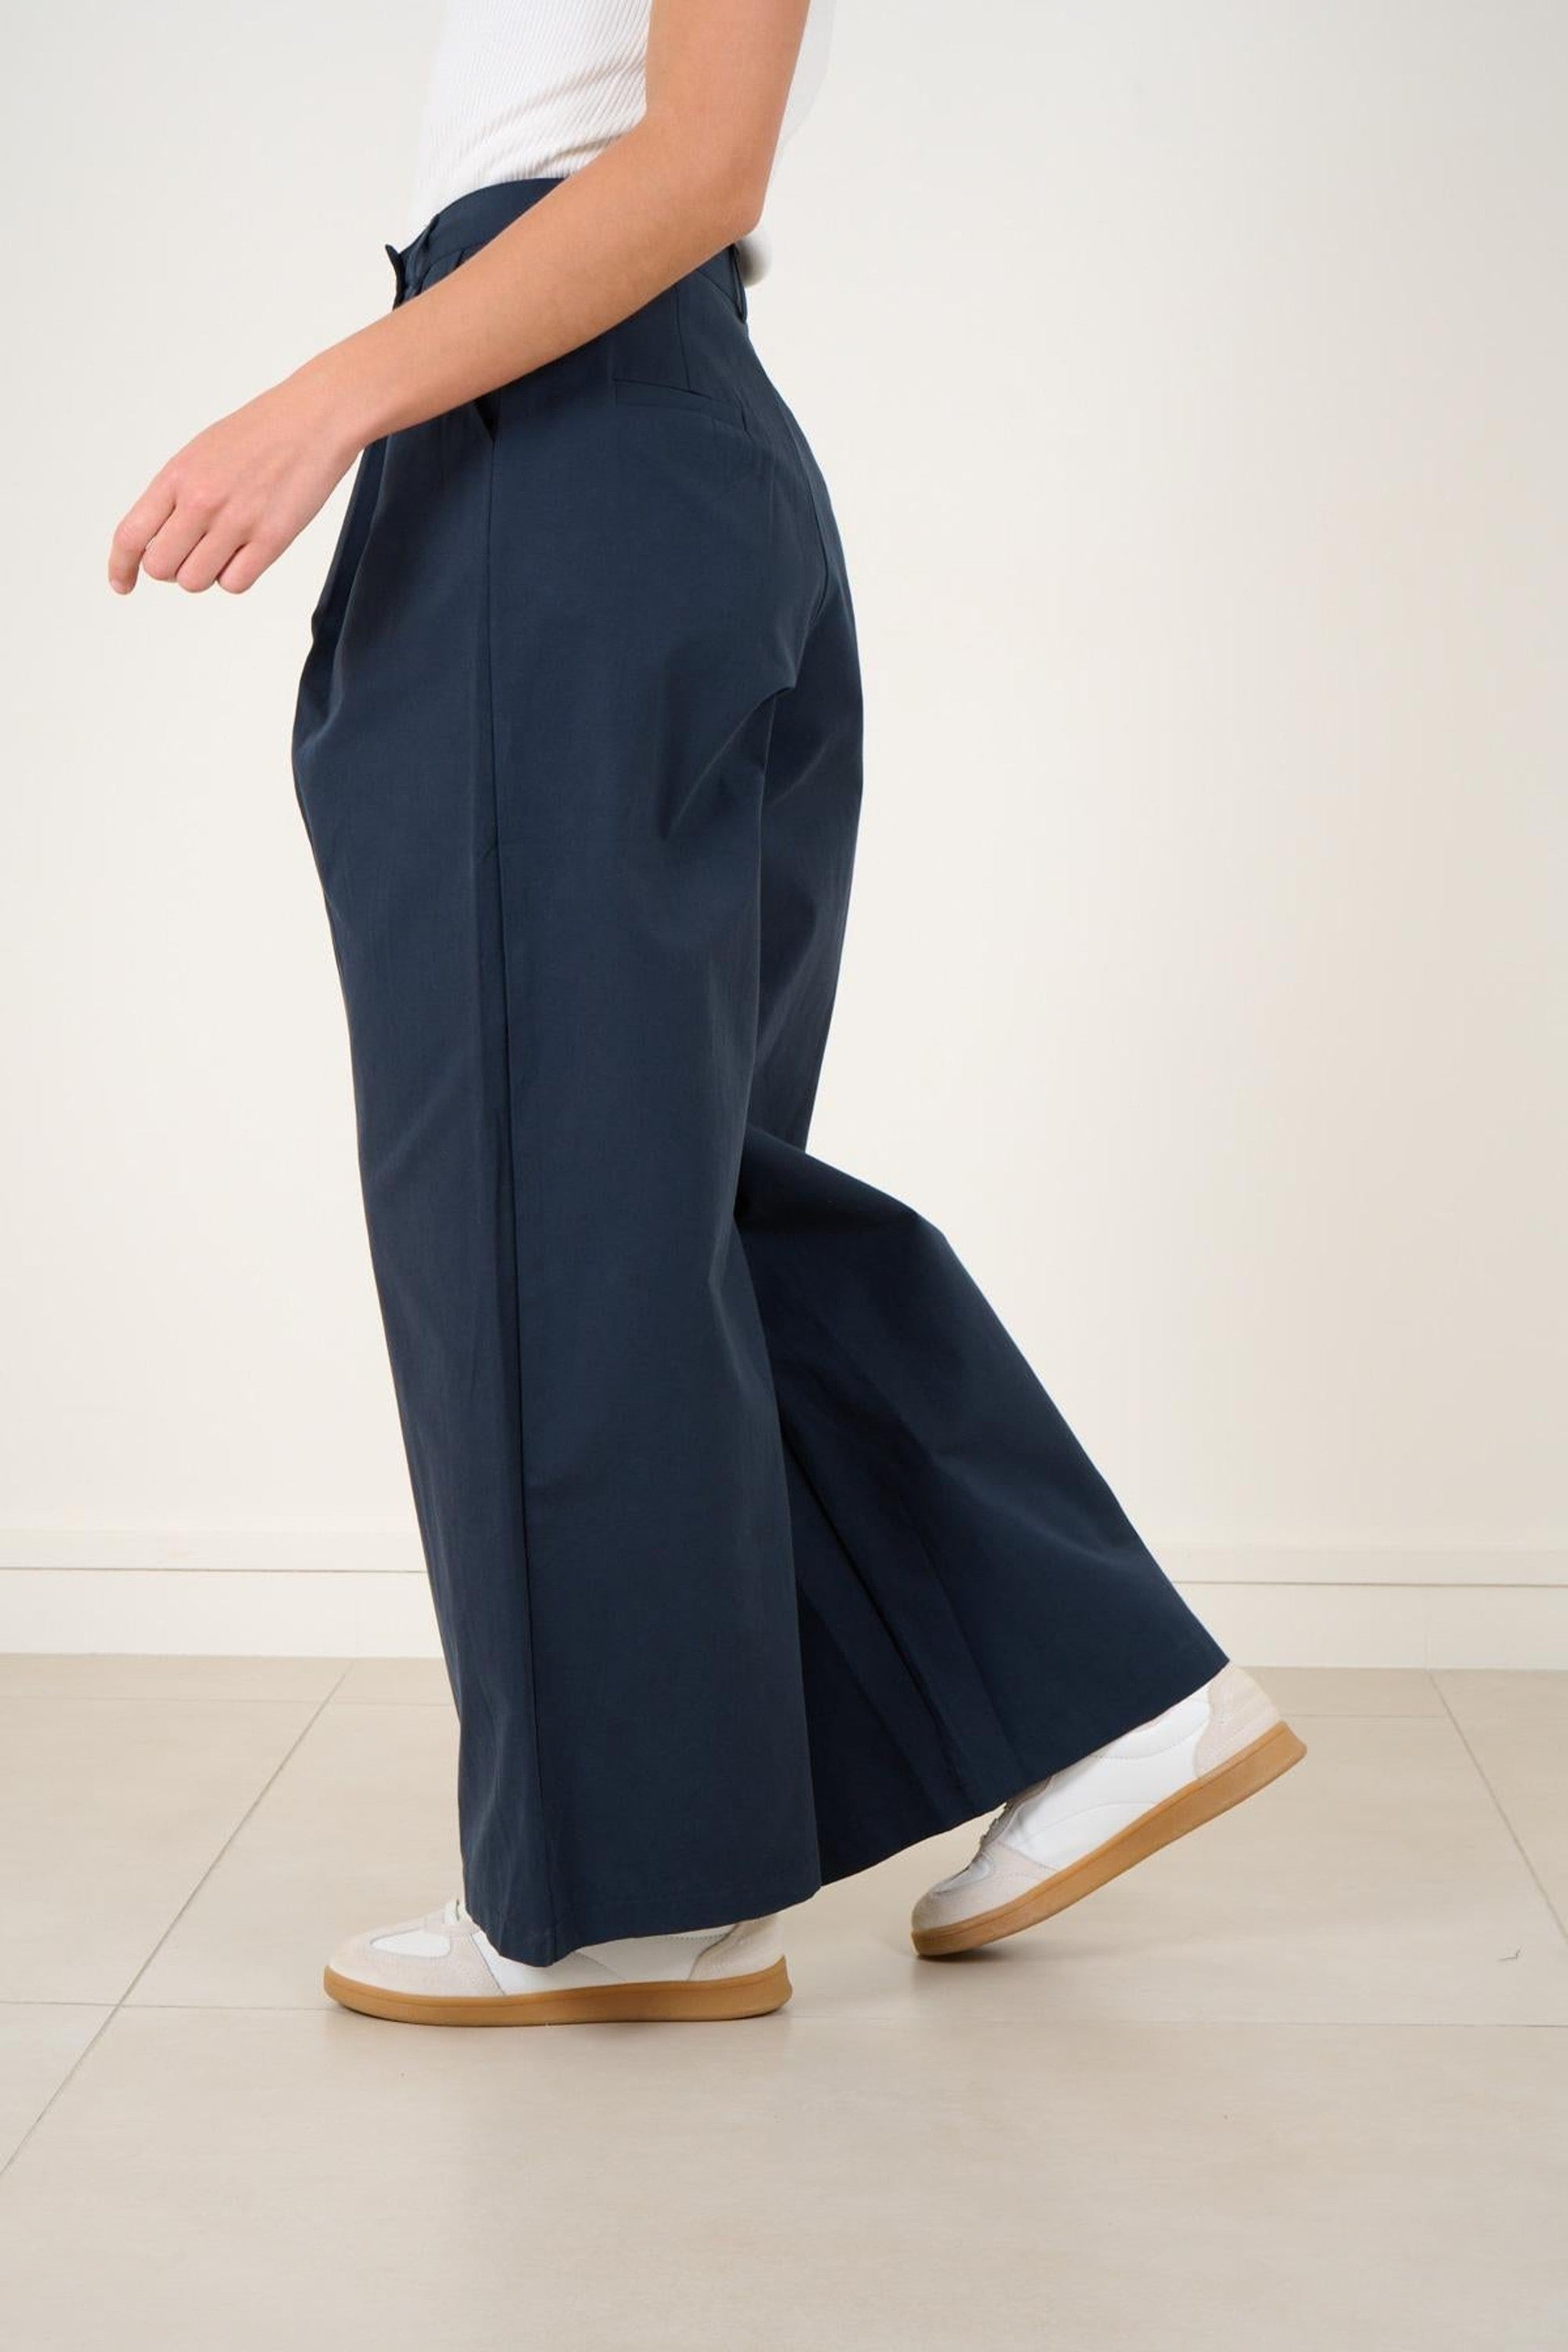 Clever Alice Lille Pant